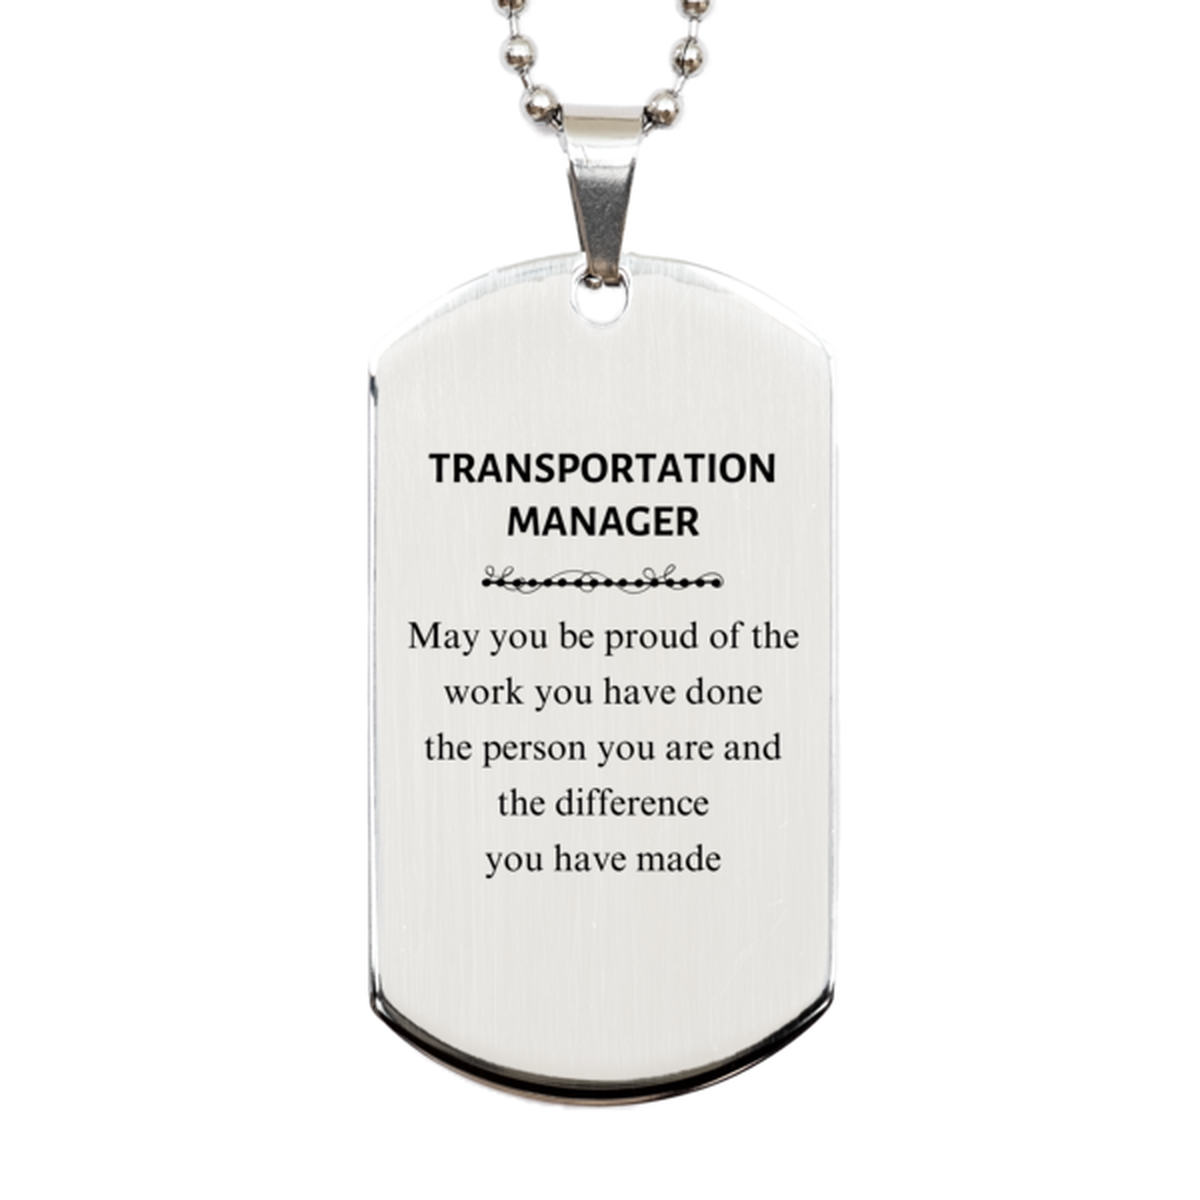 Transportation Manager May you be proud of the work you have done, Retirement Transportation Manager Silver Dog Tag for Colleague Appreciation Gifts Amazing for Transportation Manager